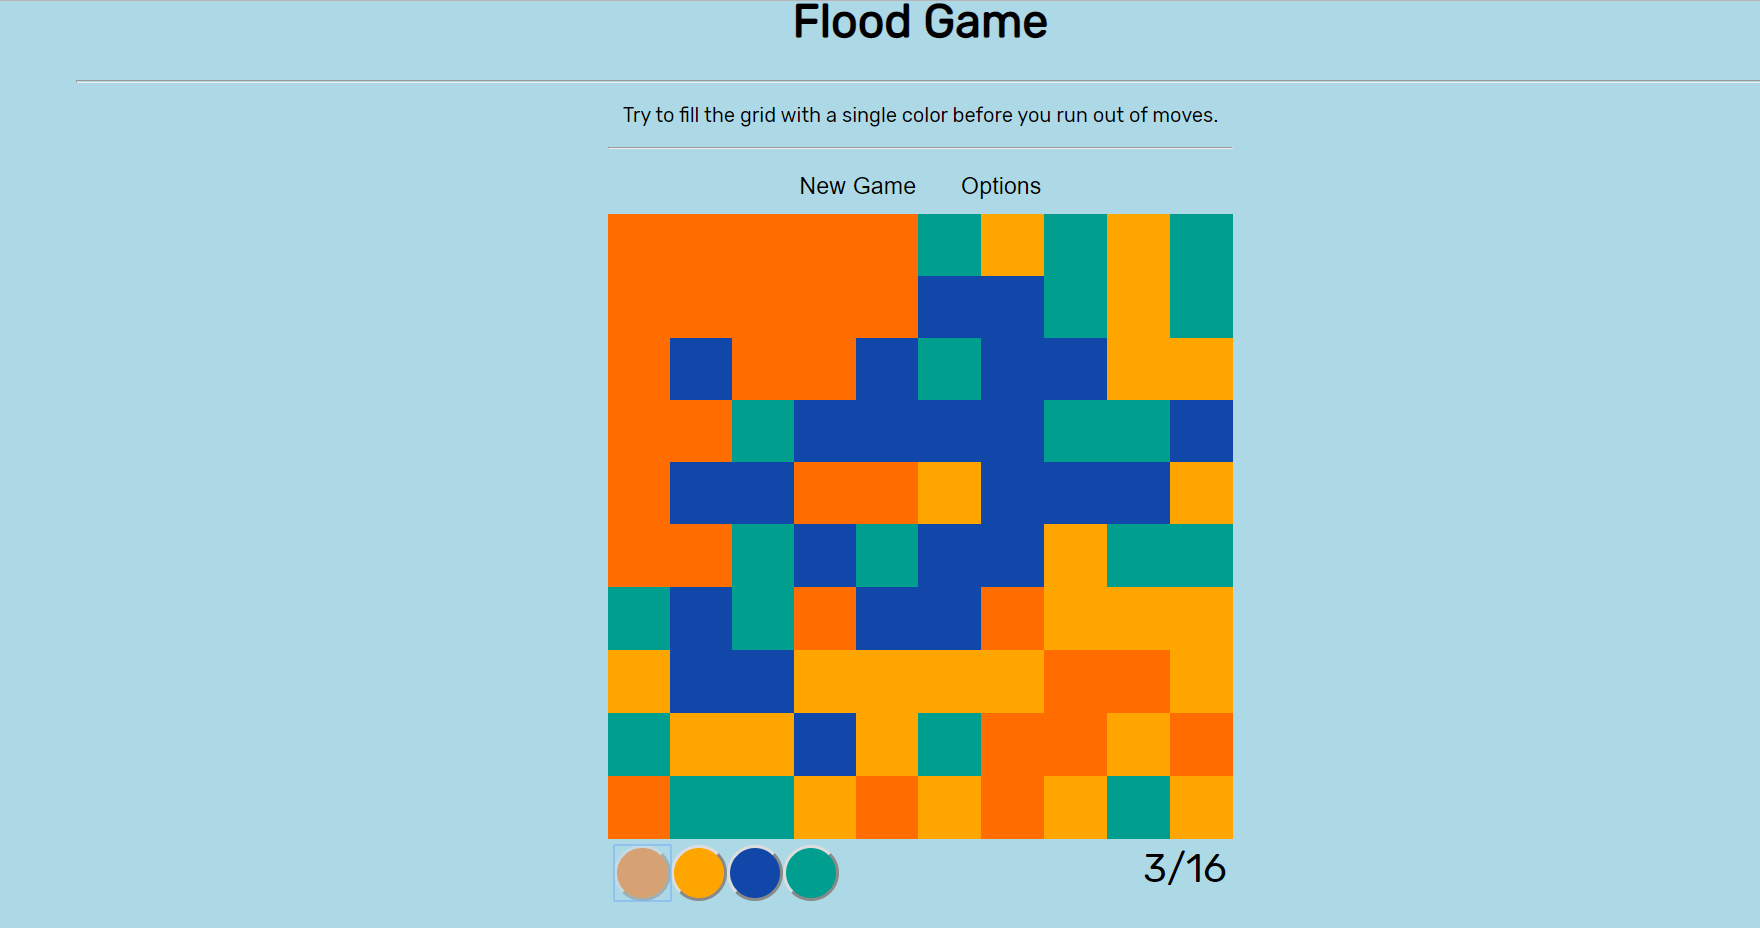 Screenshot 80 - FLOOD GAME IN JAVASCRIPT WITH SOURCE CODE